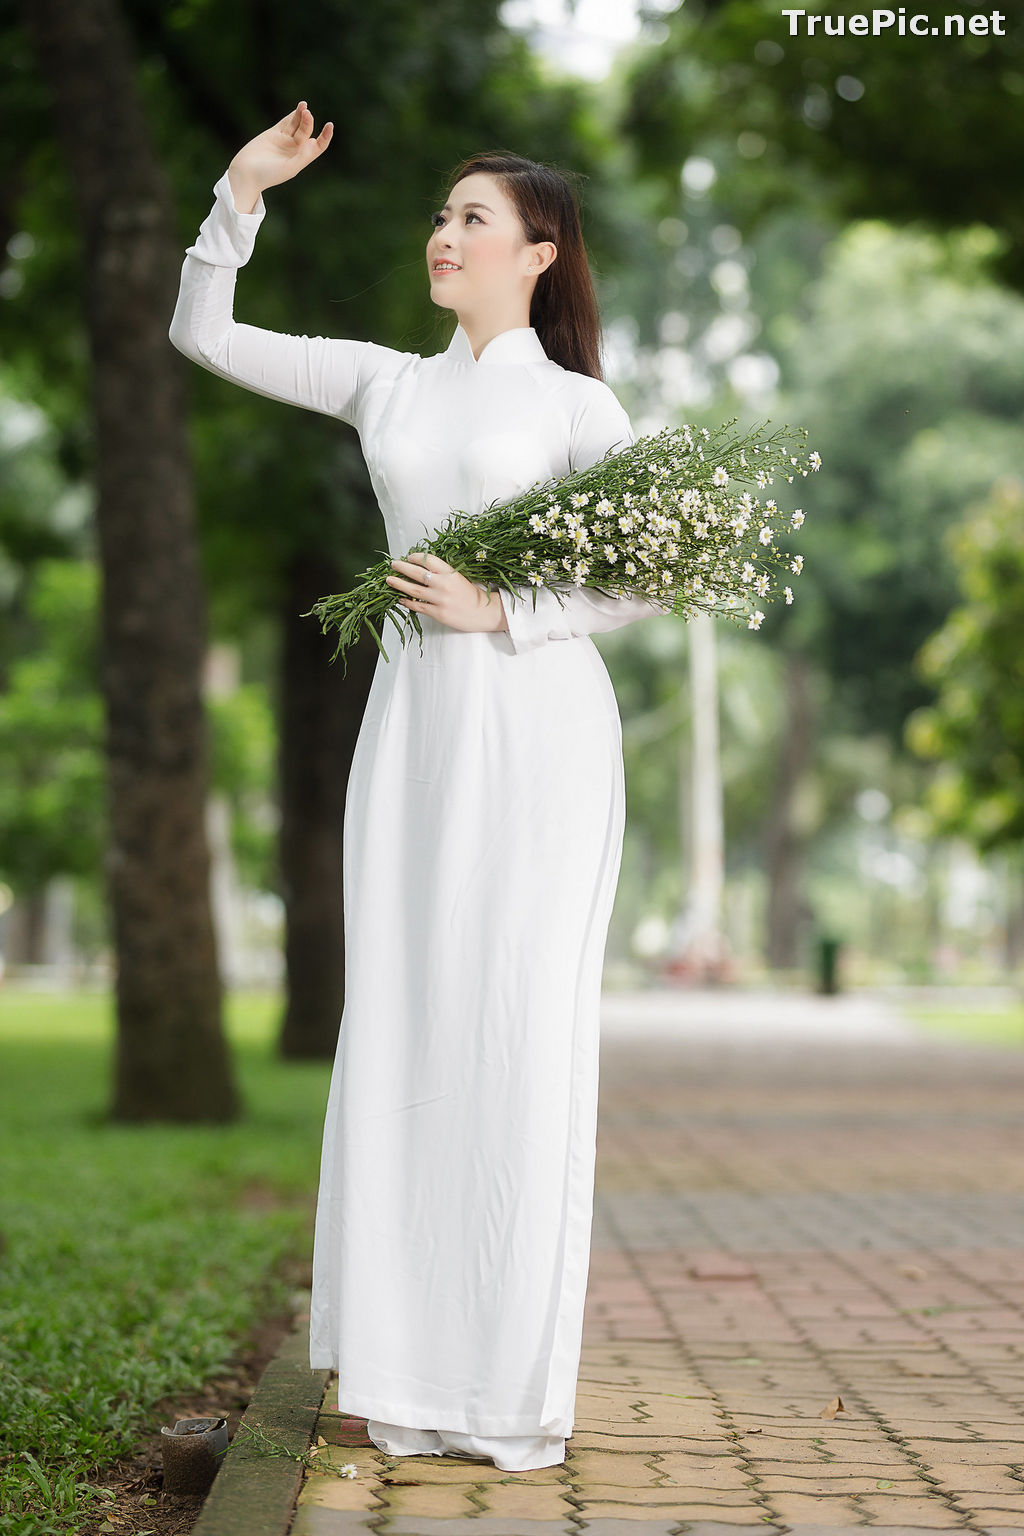 Image The Beauty of Vietnamese Girls with Traditional Dress (Ao Dai) #1 - TruePic.net - Picture-61